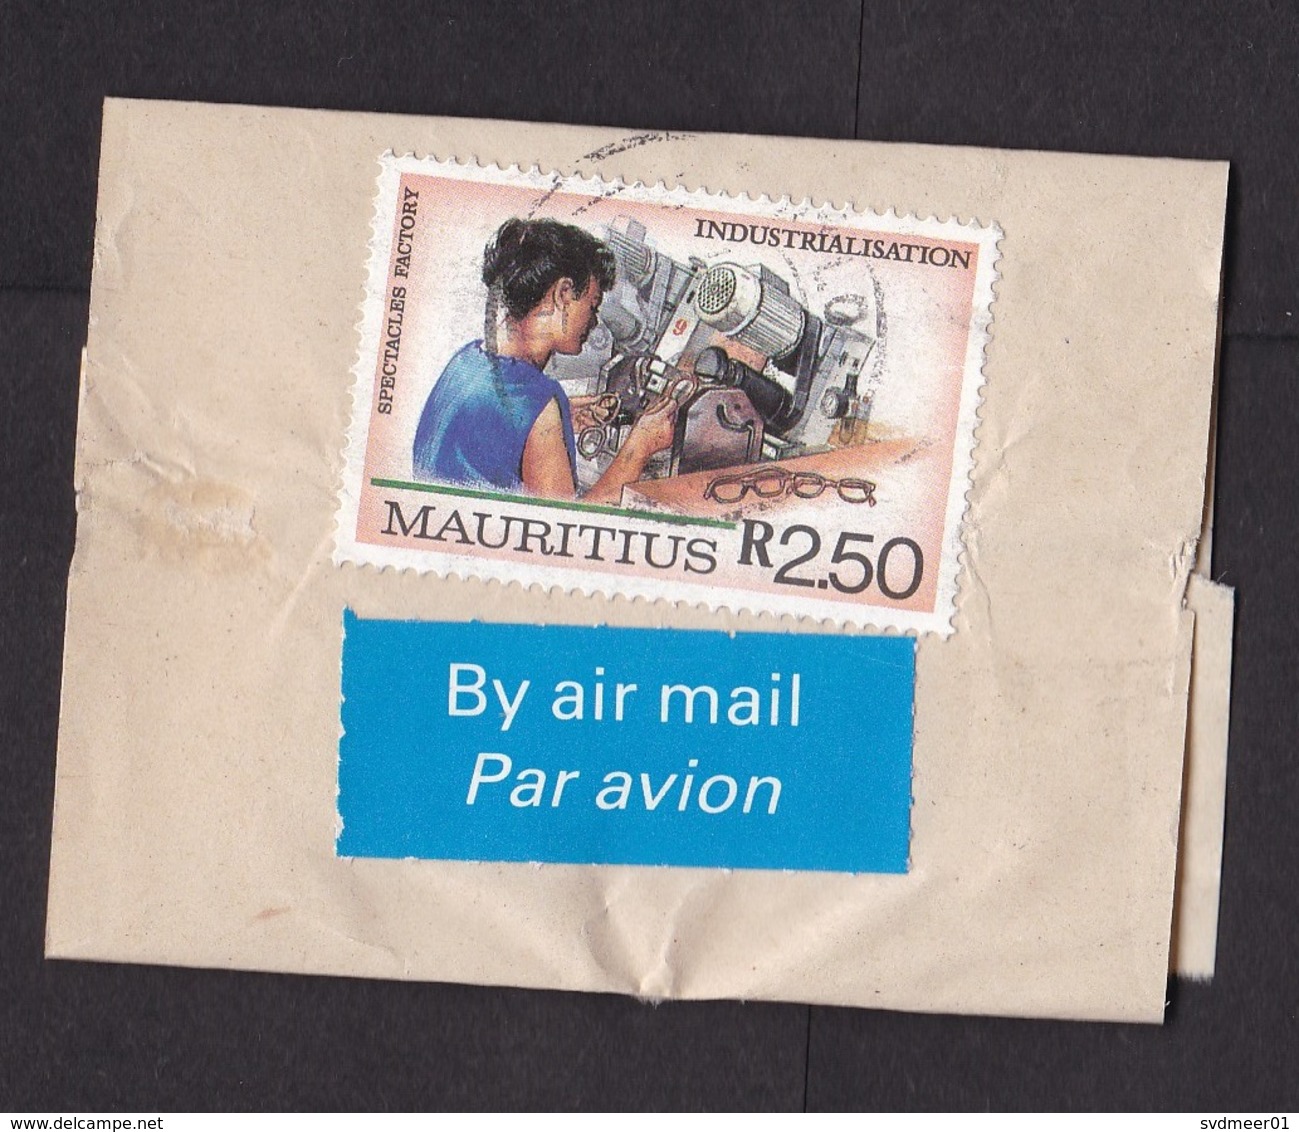 Mauritius: Small Airmail Wrapper To Netherlands, 1980s, 1 Stamp, Spectacles Factory, Industry, Label (damaged, See Scan) - Mauritius (1968-...)